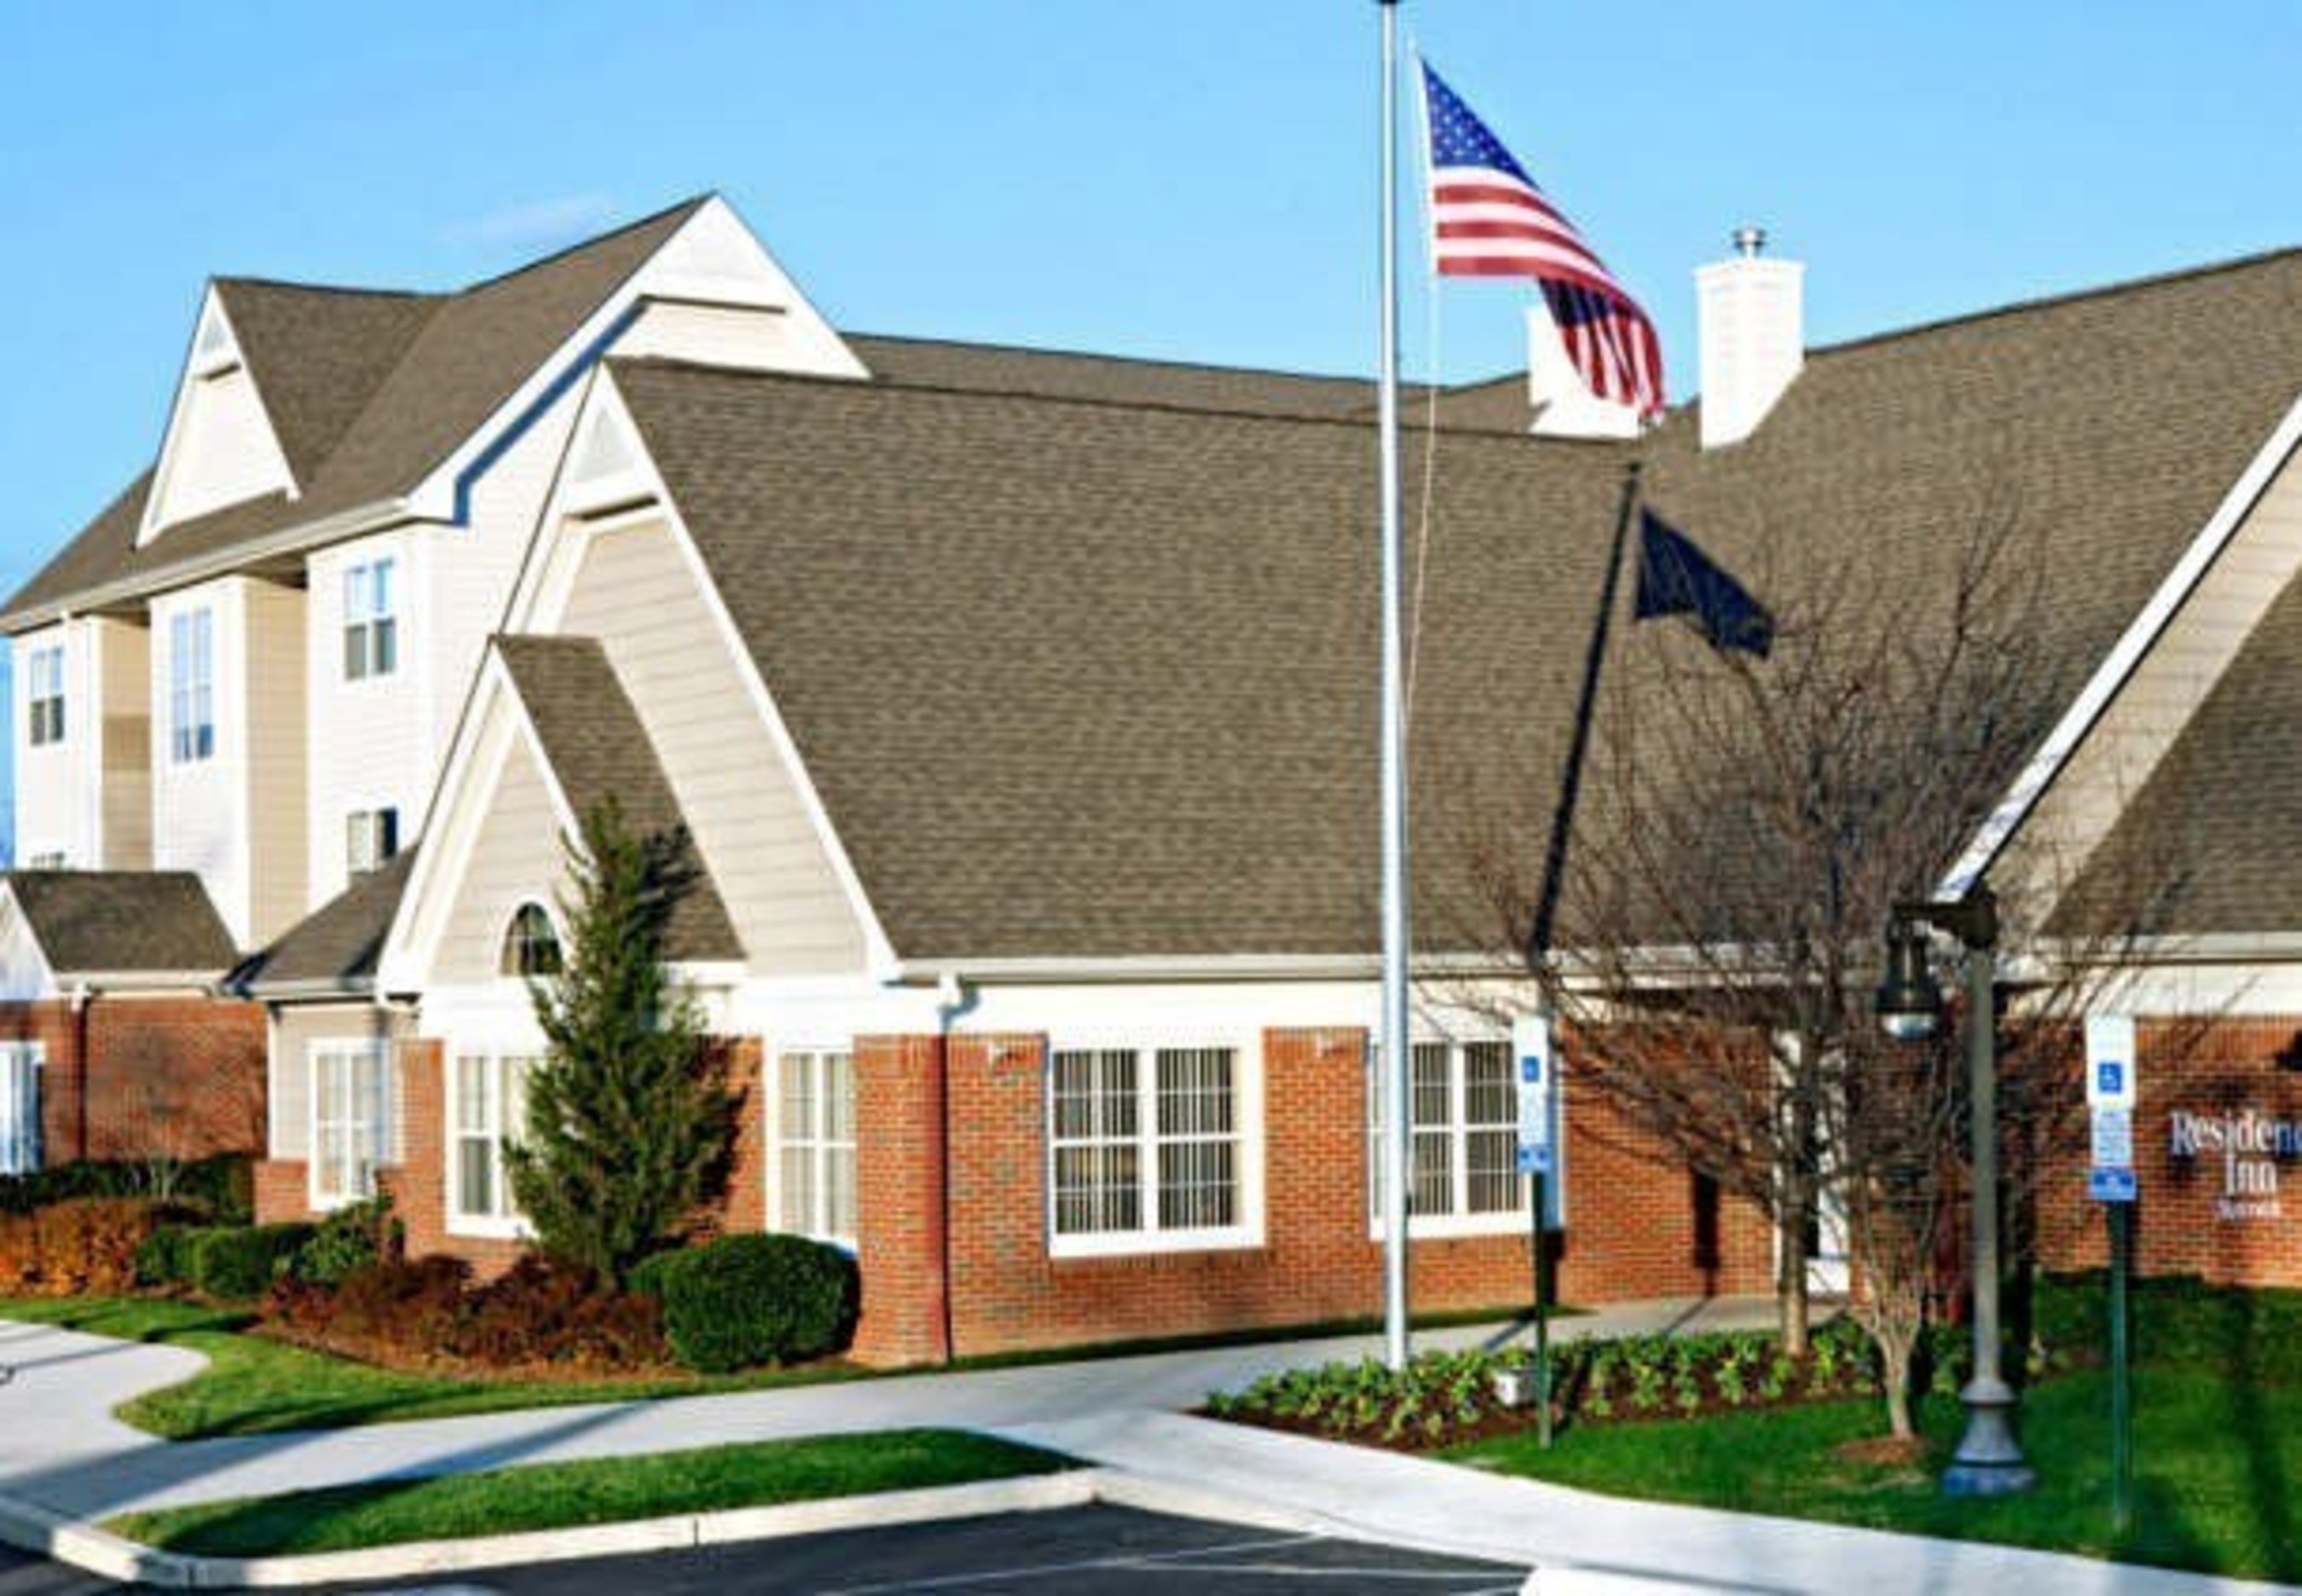 Residence Inn Cranbury South Brunswick now offers a complimentary shuttle service Monday through Friday to a variety of nearby business offices, making it easy for professionals to work while on the road. For information, visit www.CranburyResidenceInn.com or call 1-609-395-9447.